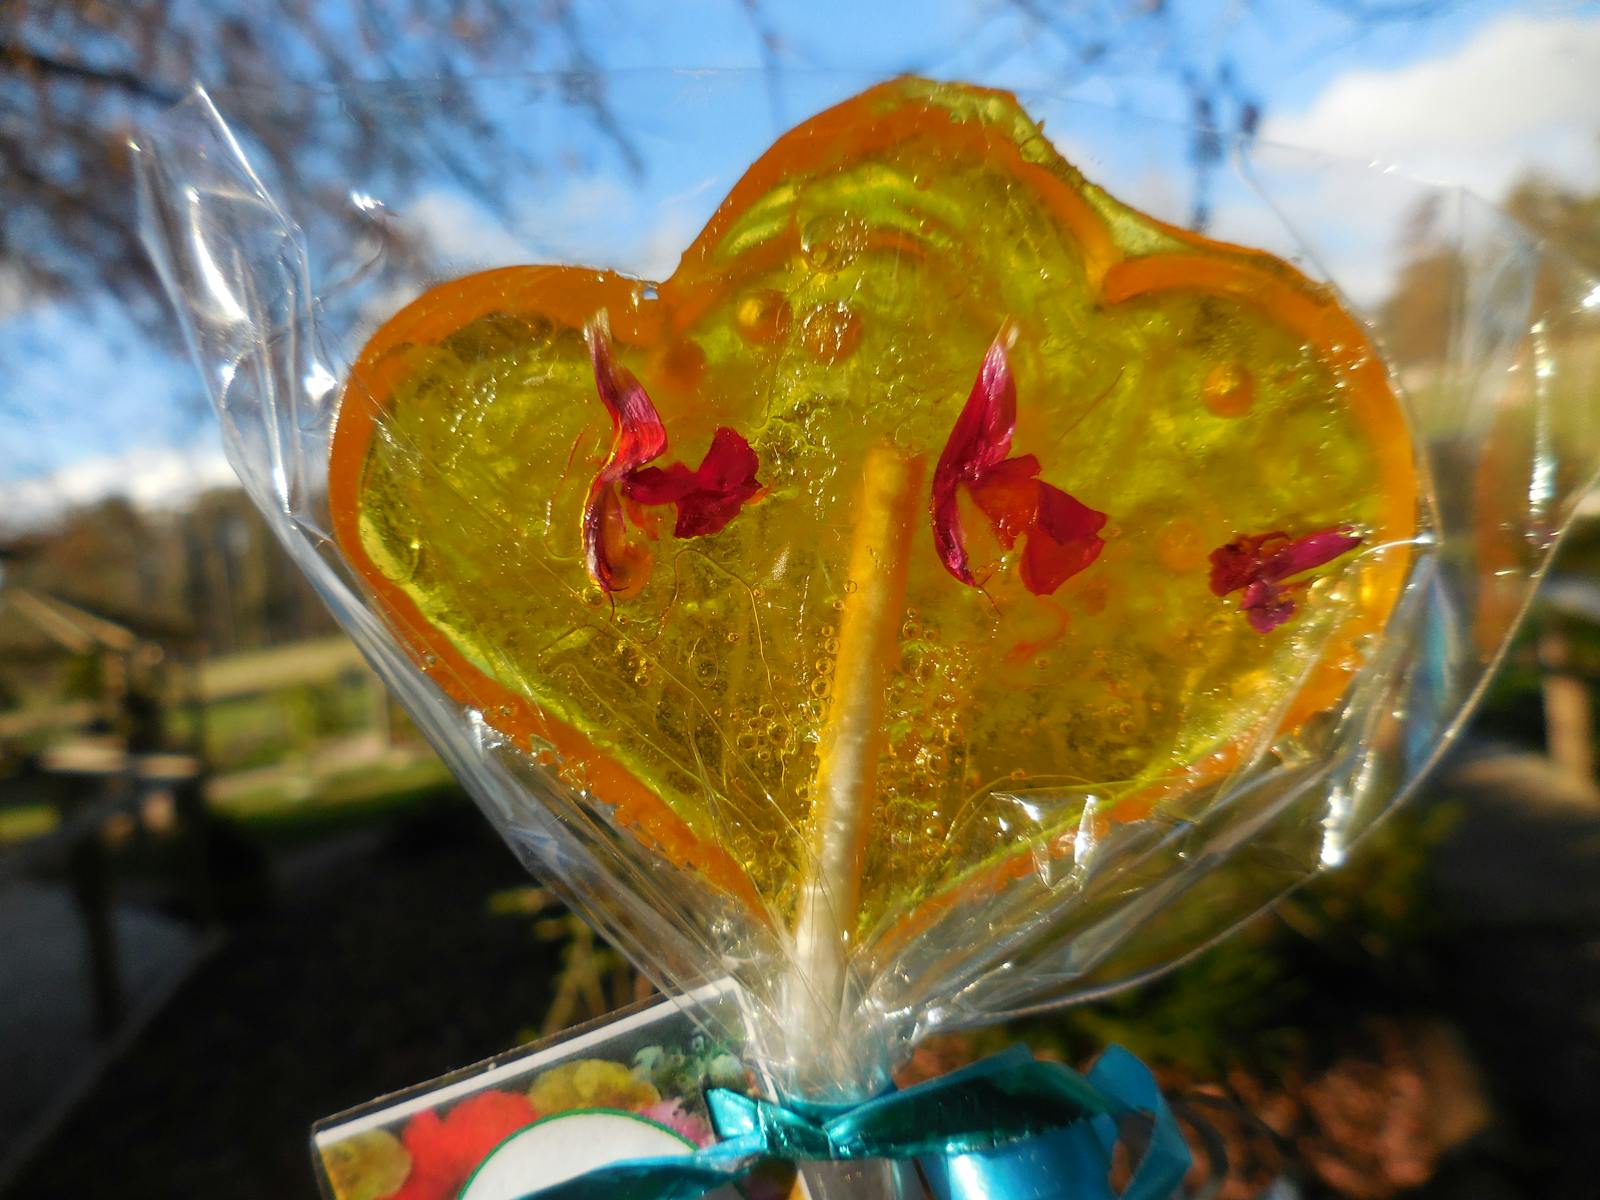 Lemon lollipop in the shape of a double heart, inset with pink edible flowers